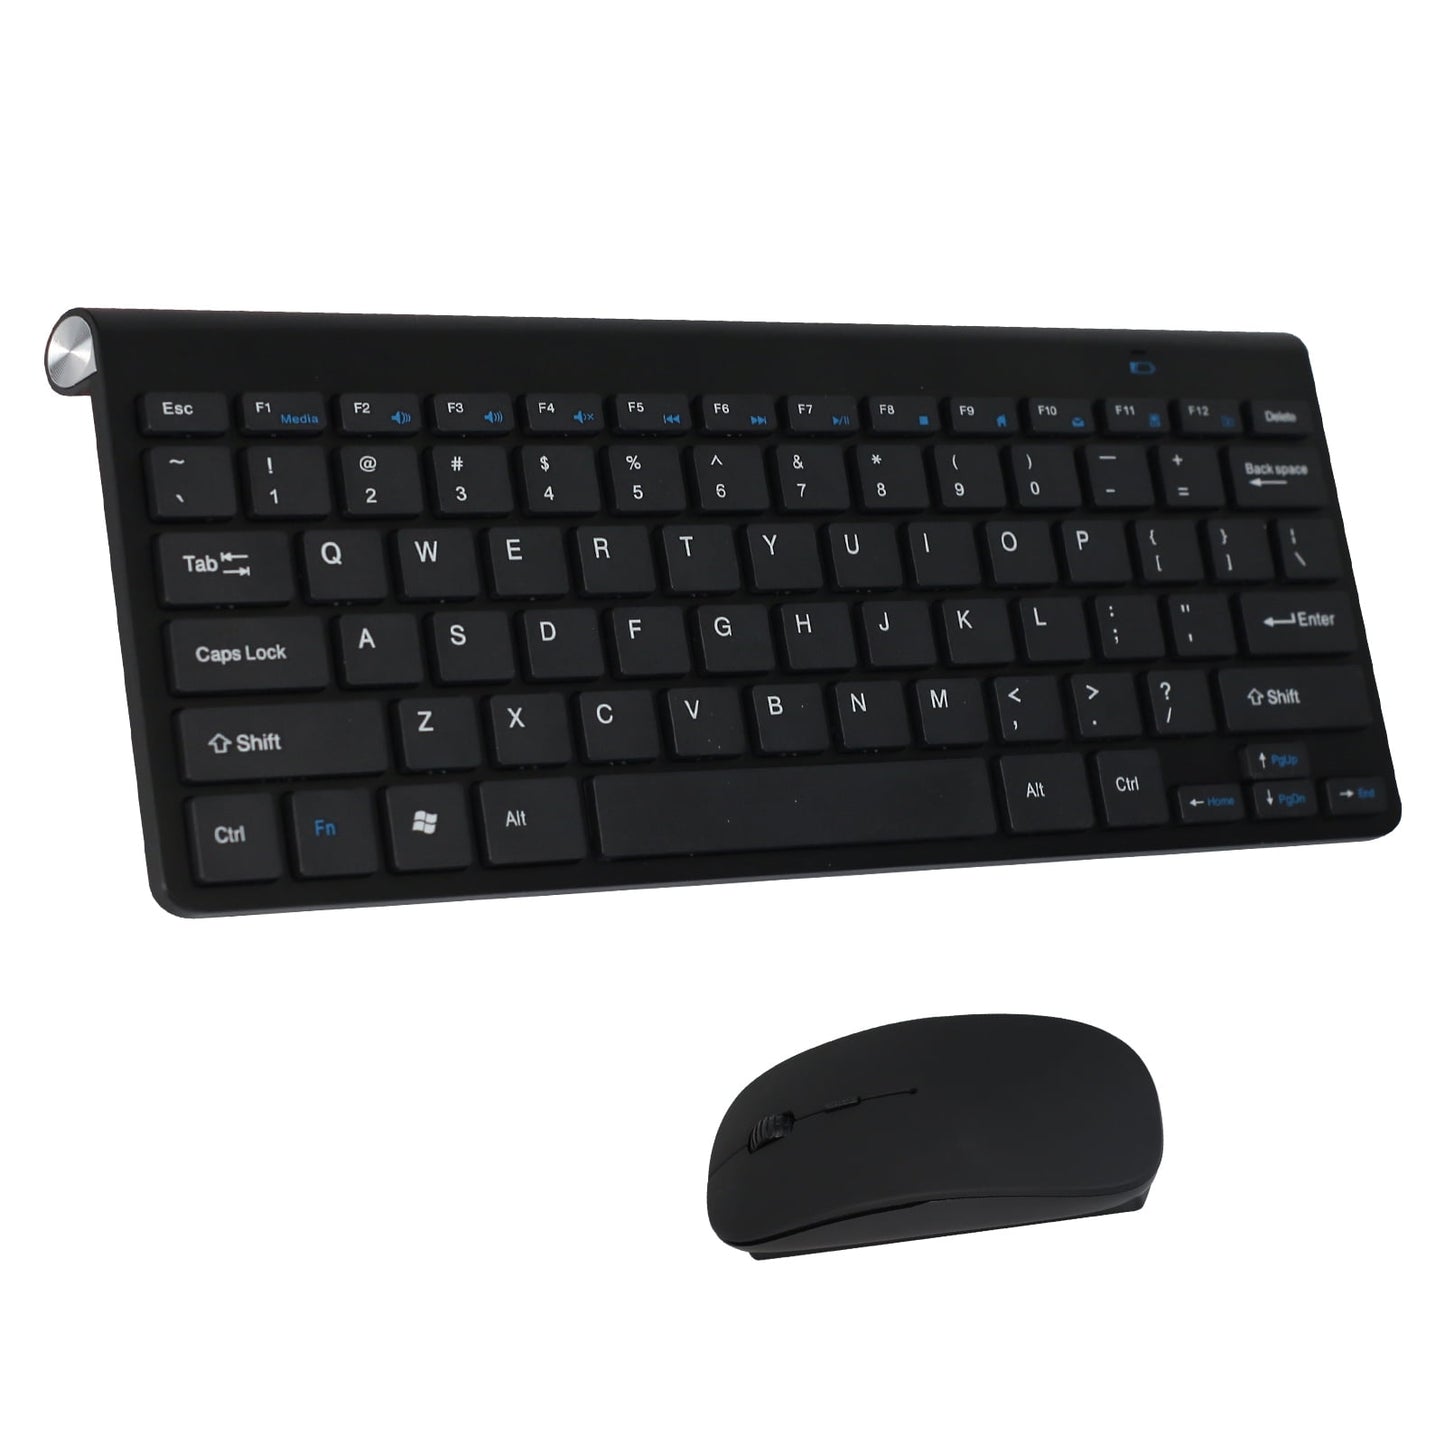 Kepeak Wireless Keyboard and Mouse Combo,Slim Compact Keyboard for Computer,Laptop,Mac